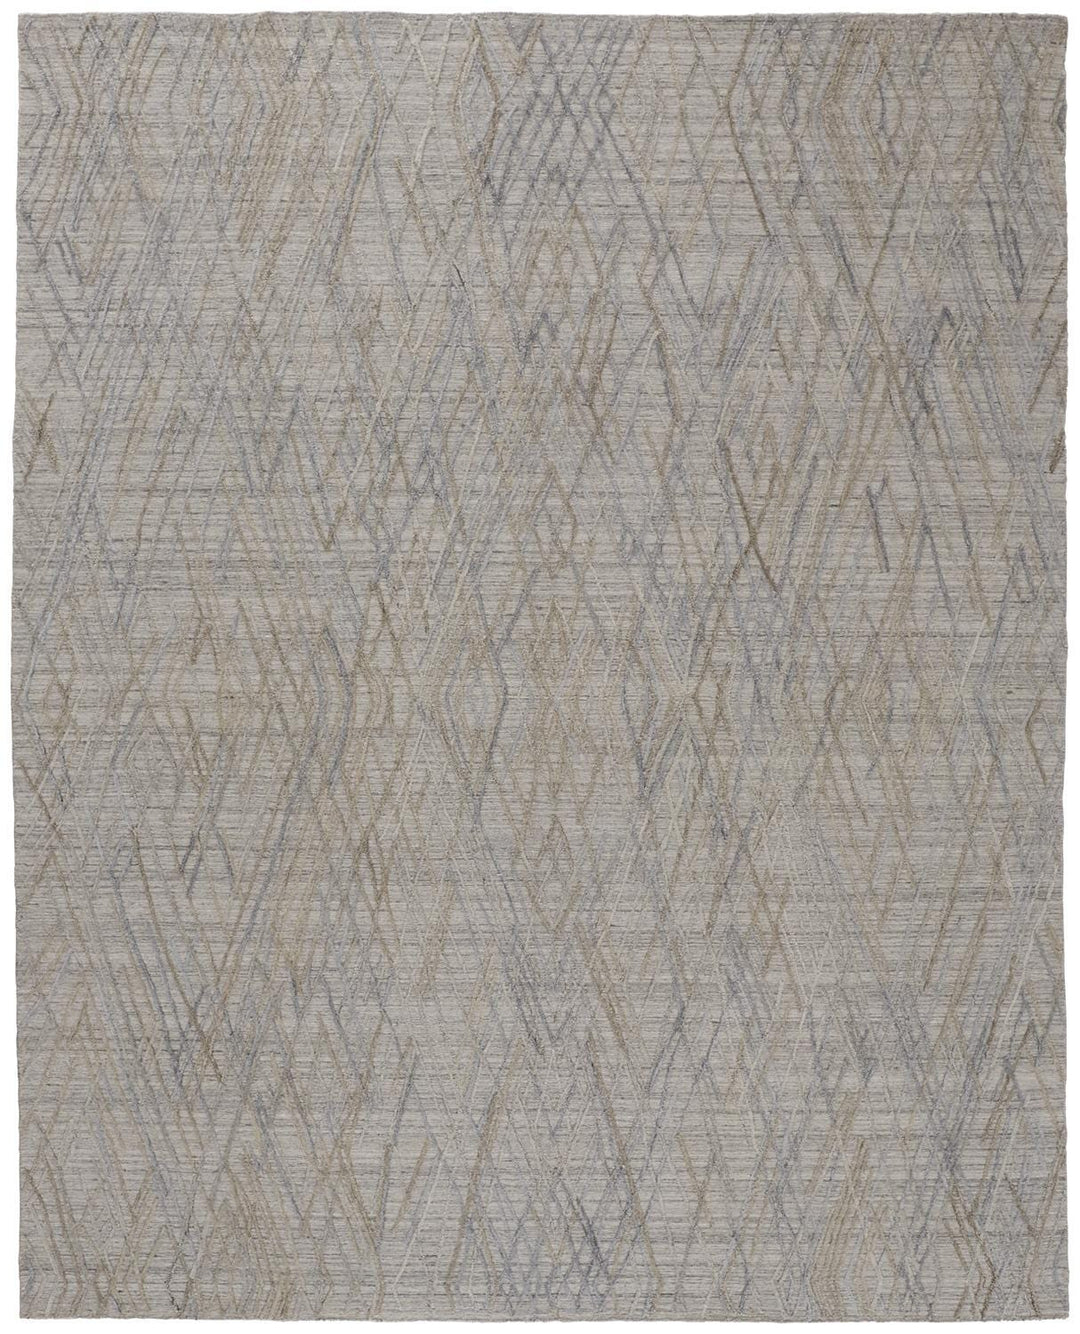 Feizy Feizy Elias Luxe Abstract High & Low Pile Rug - Silver Gray & Dusty Blue - Available in 8 Sizes